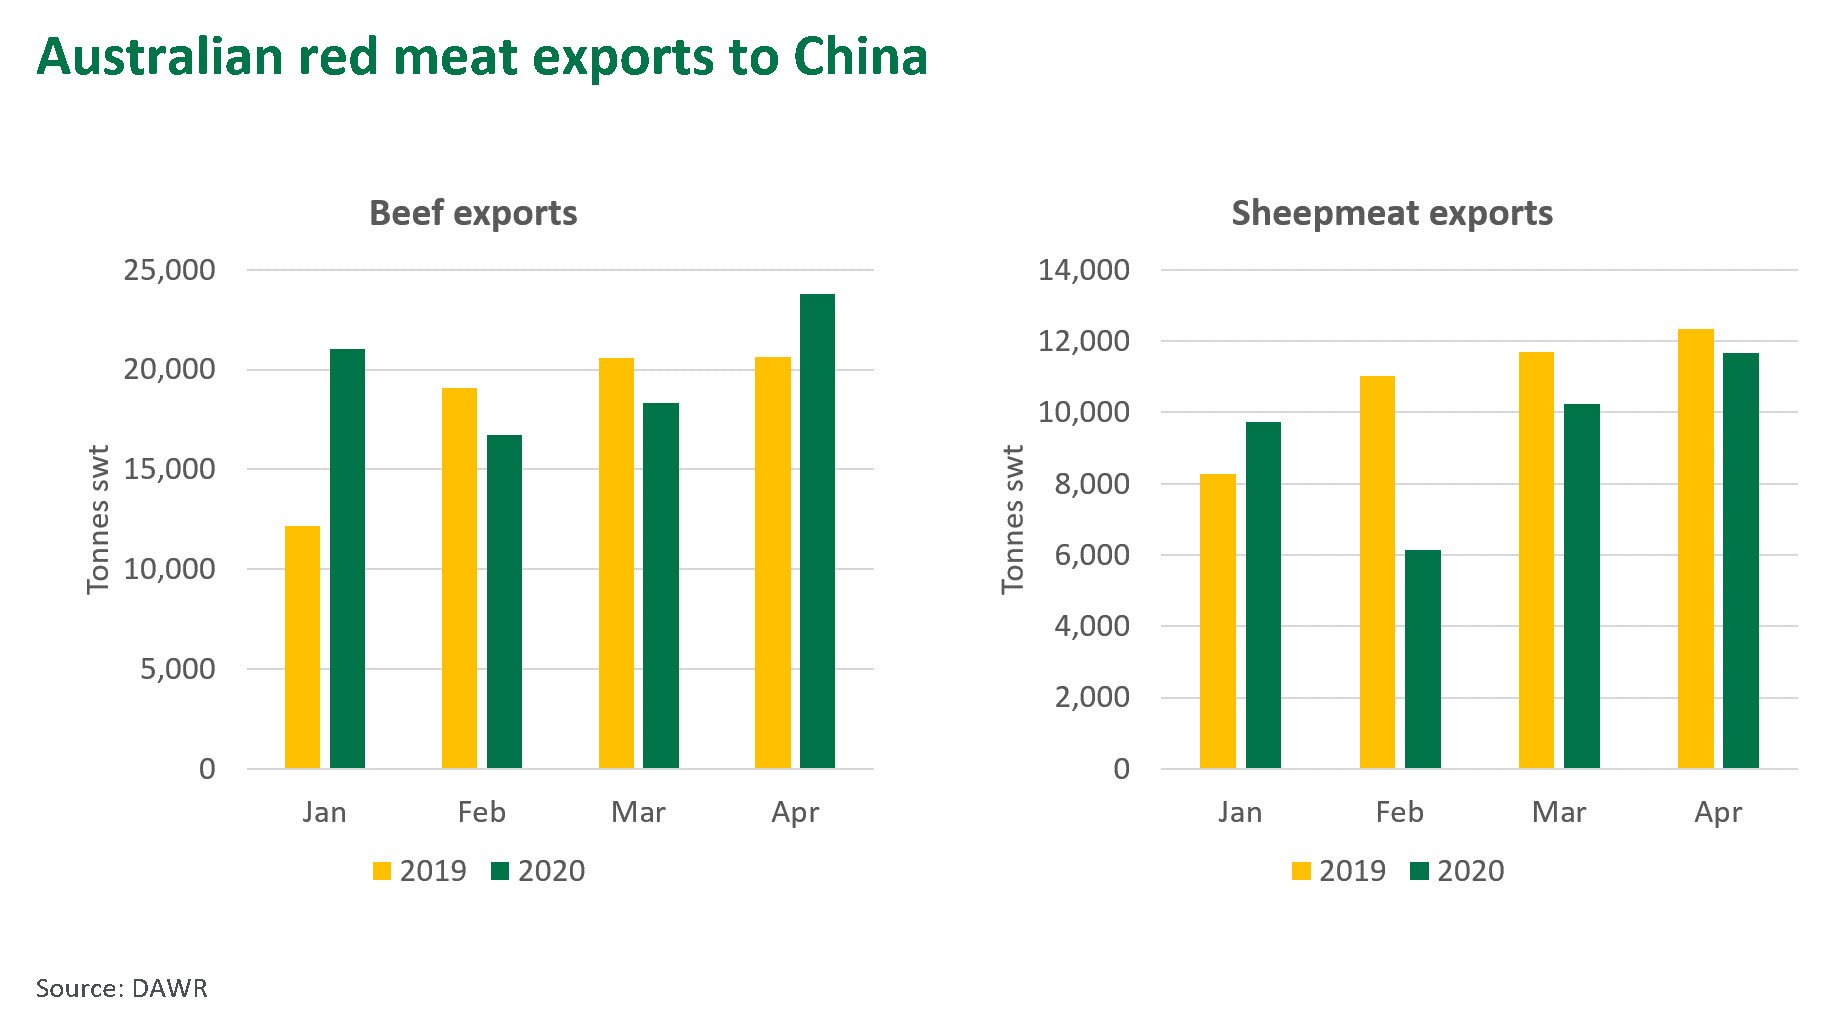 Aust-red-meat-exports-China-070520.jpg